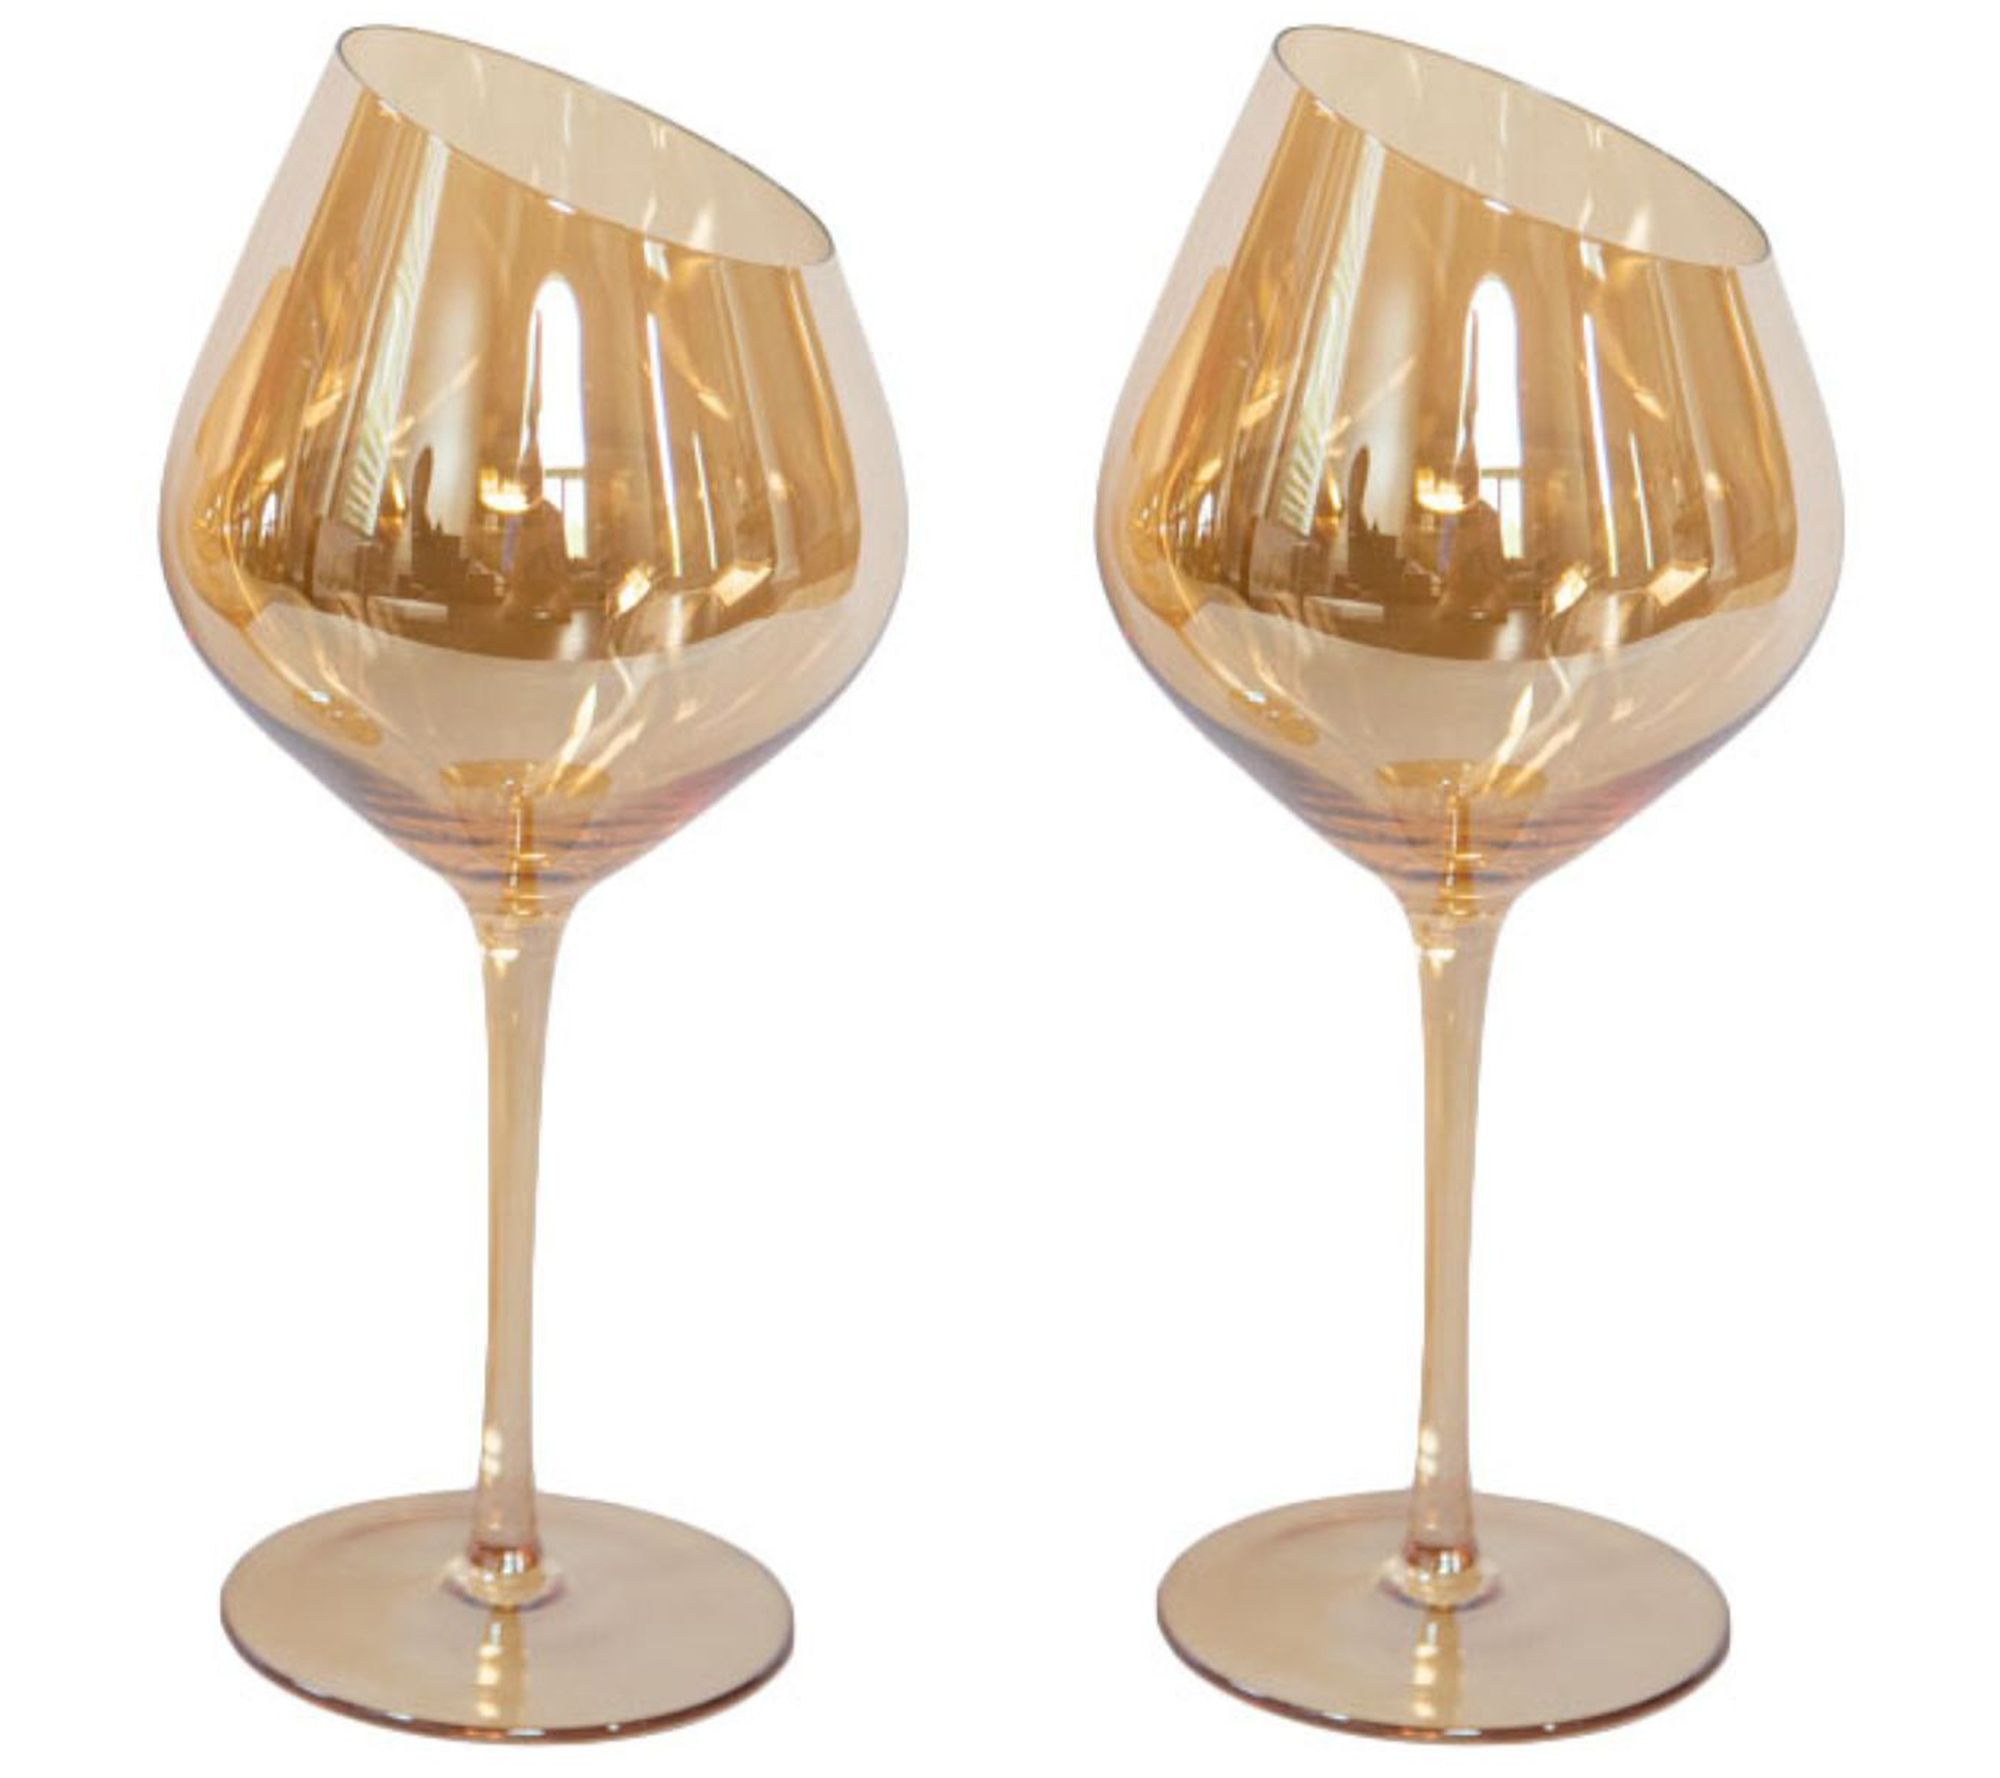 Stainless Steel Champagne Tumbler - Bride - Slant Collections